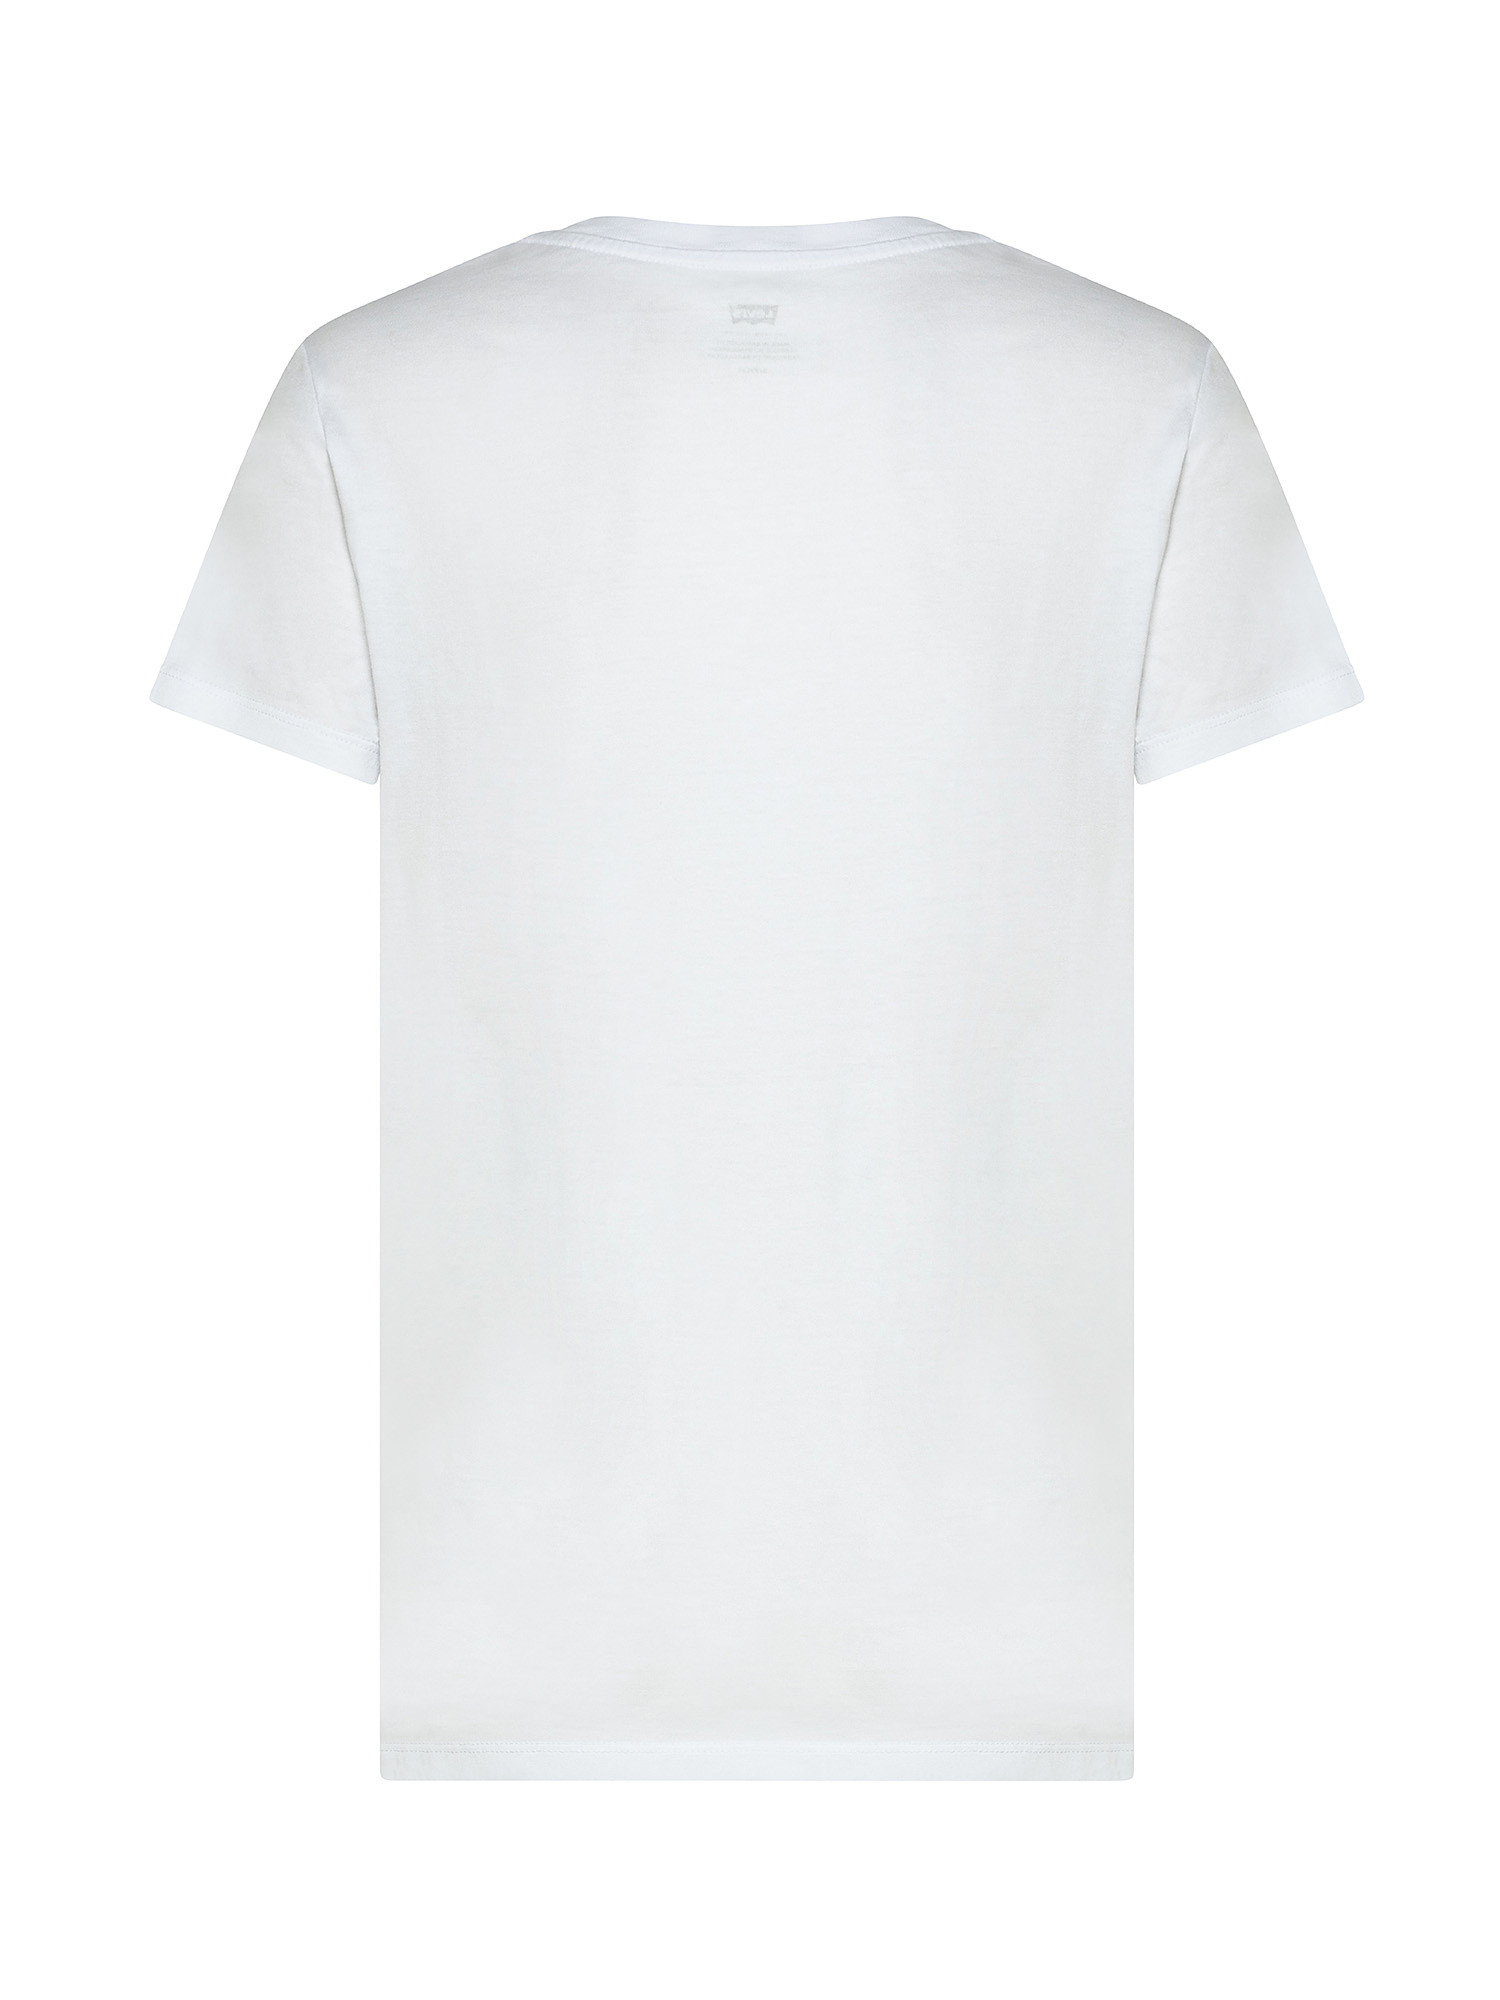 Perfect Tee T-shirt, White, large image number 1